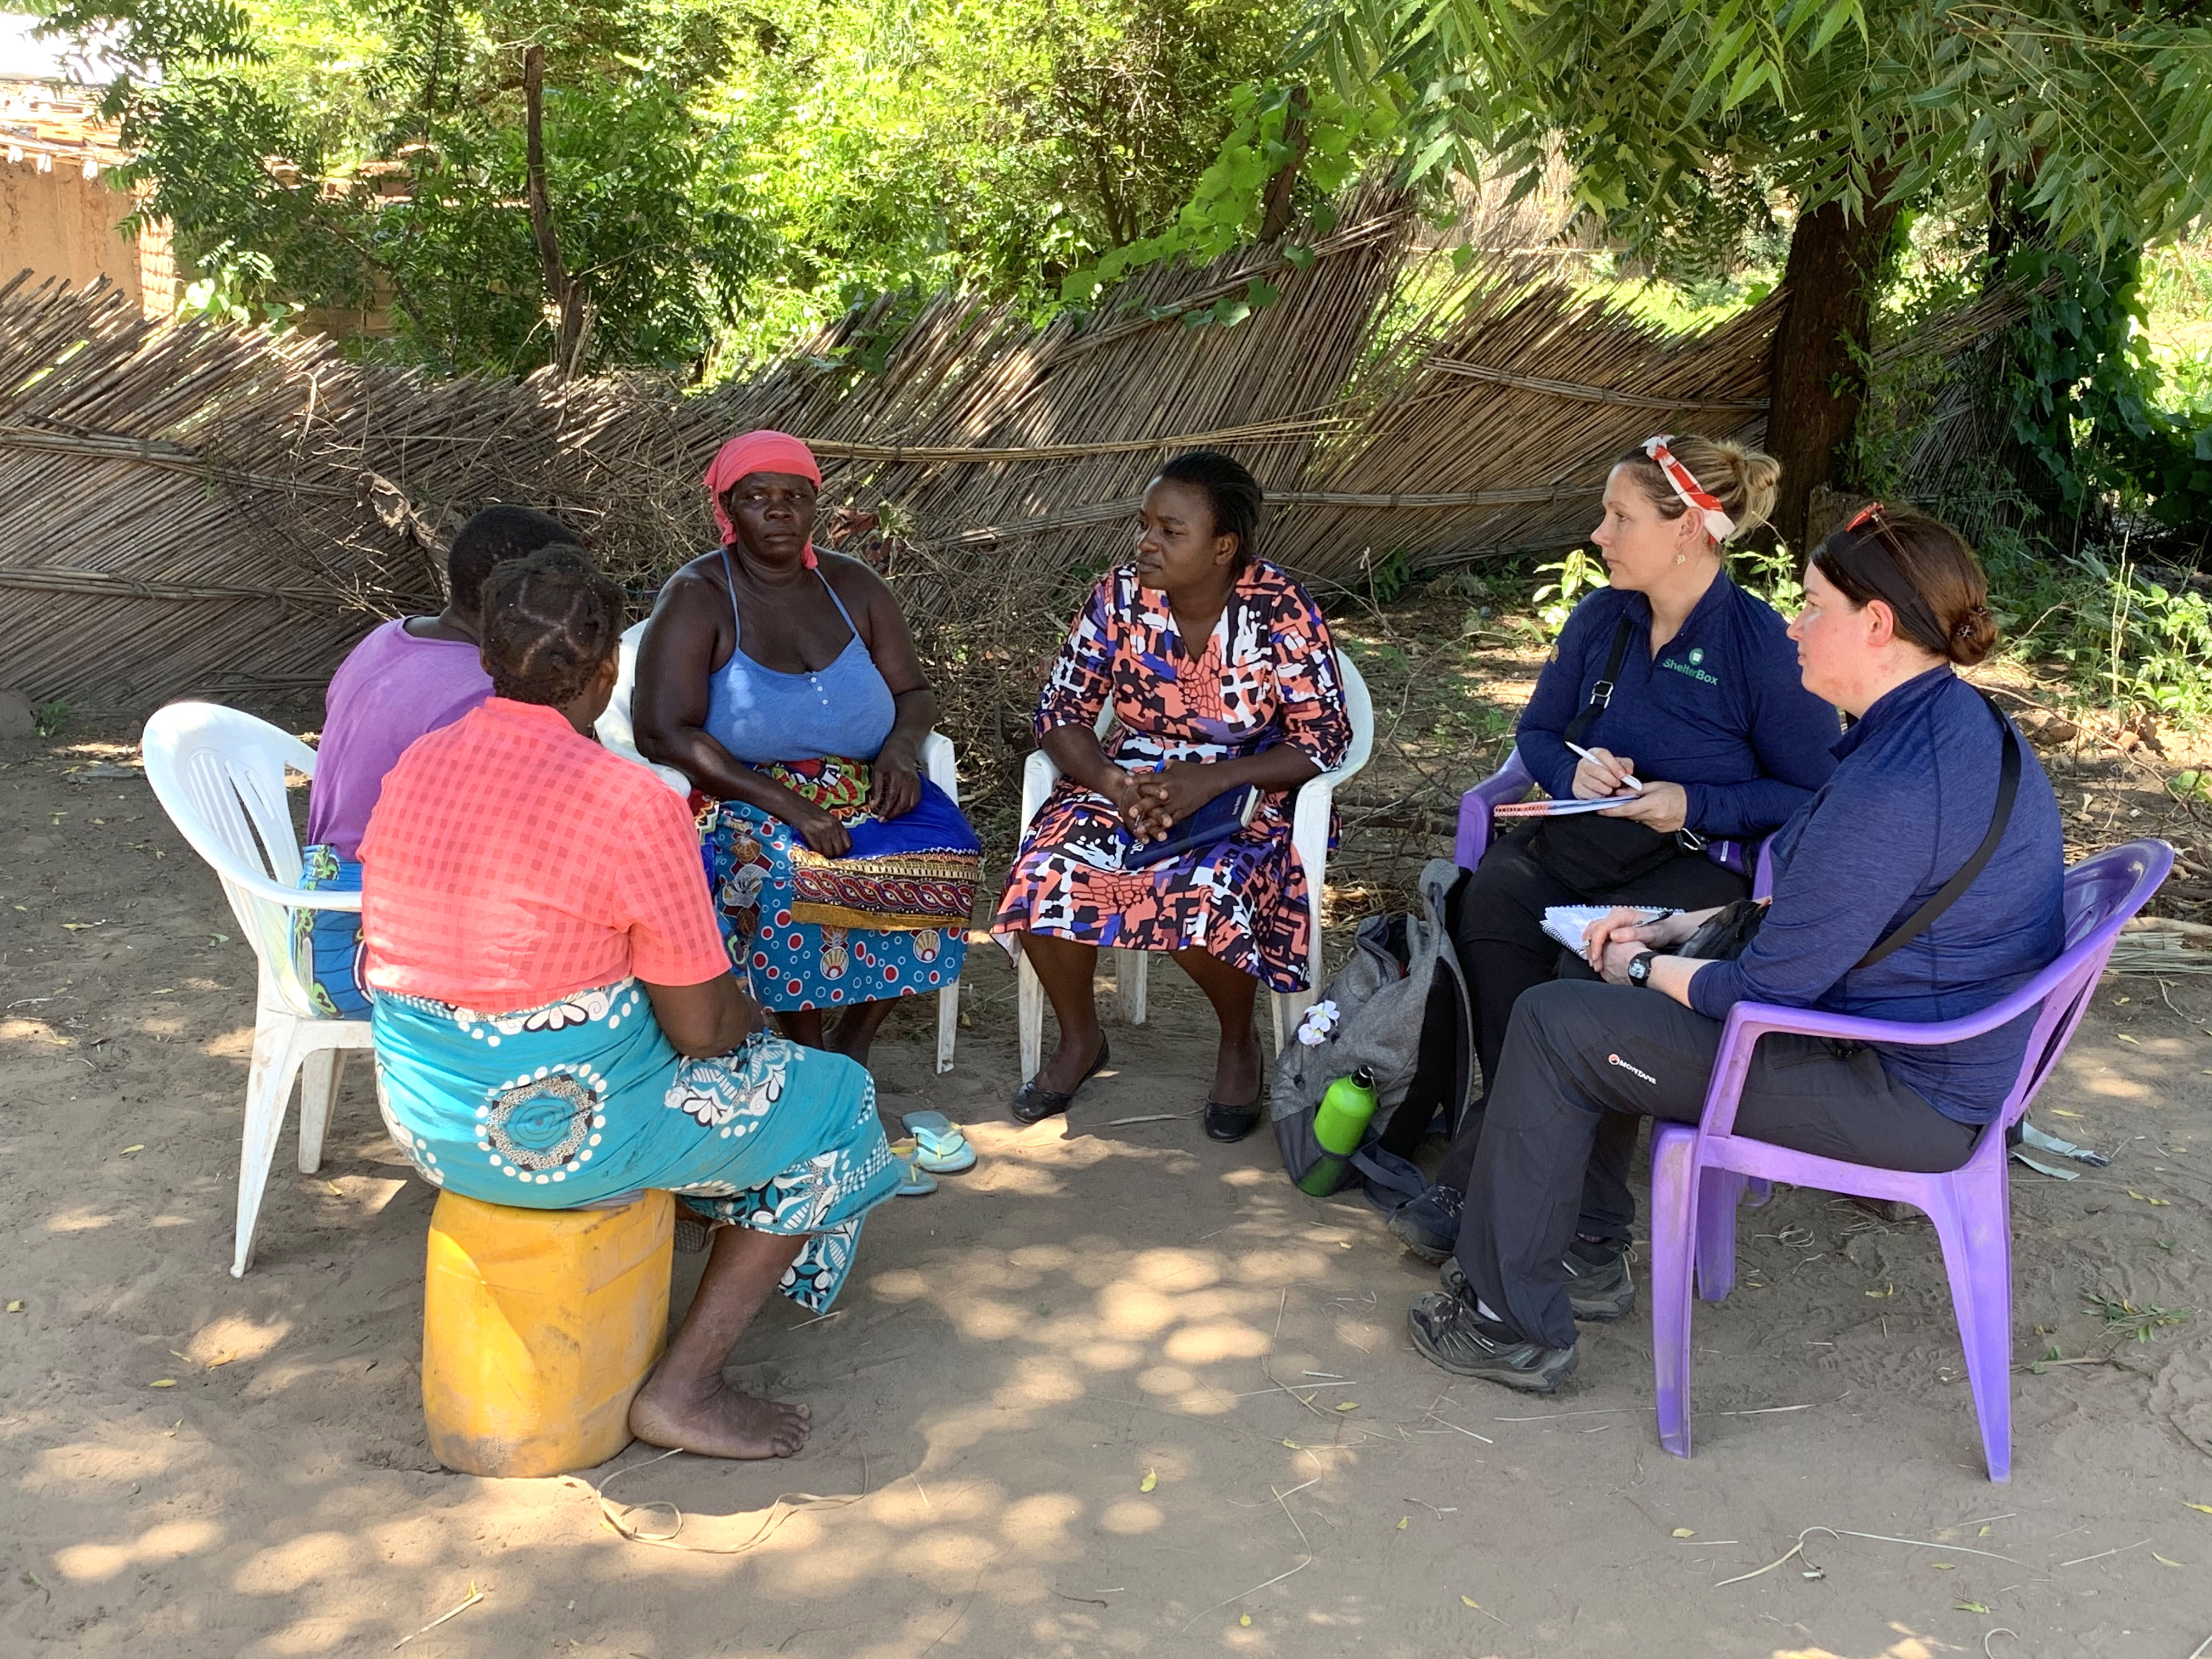 ShelterBox Response Team Members talk with women in Malawi to understand their needs